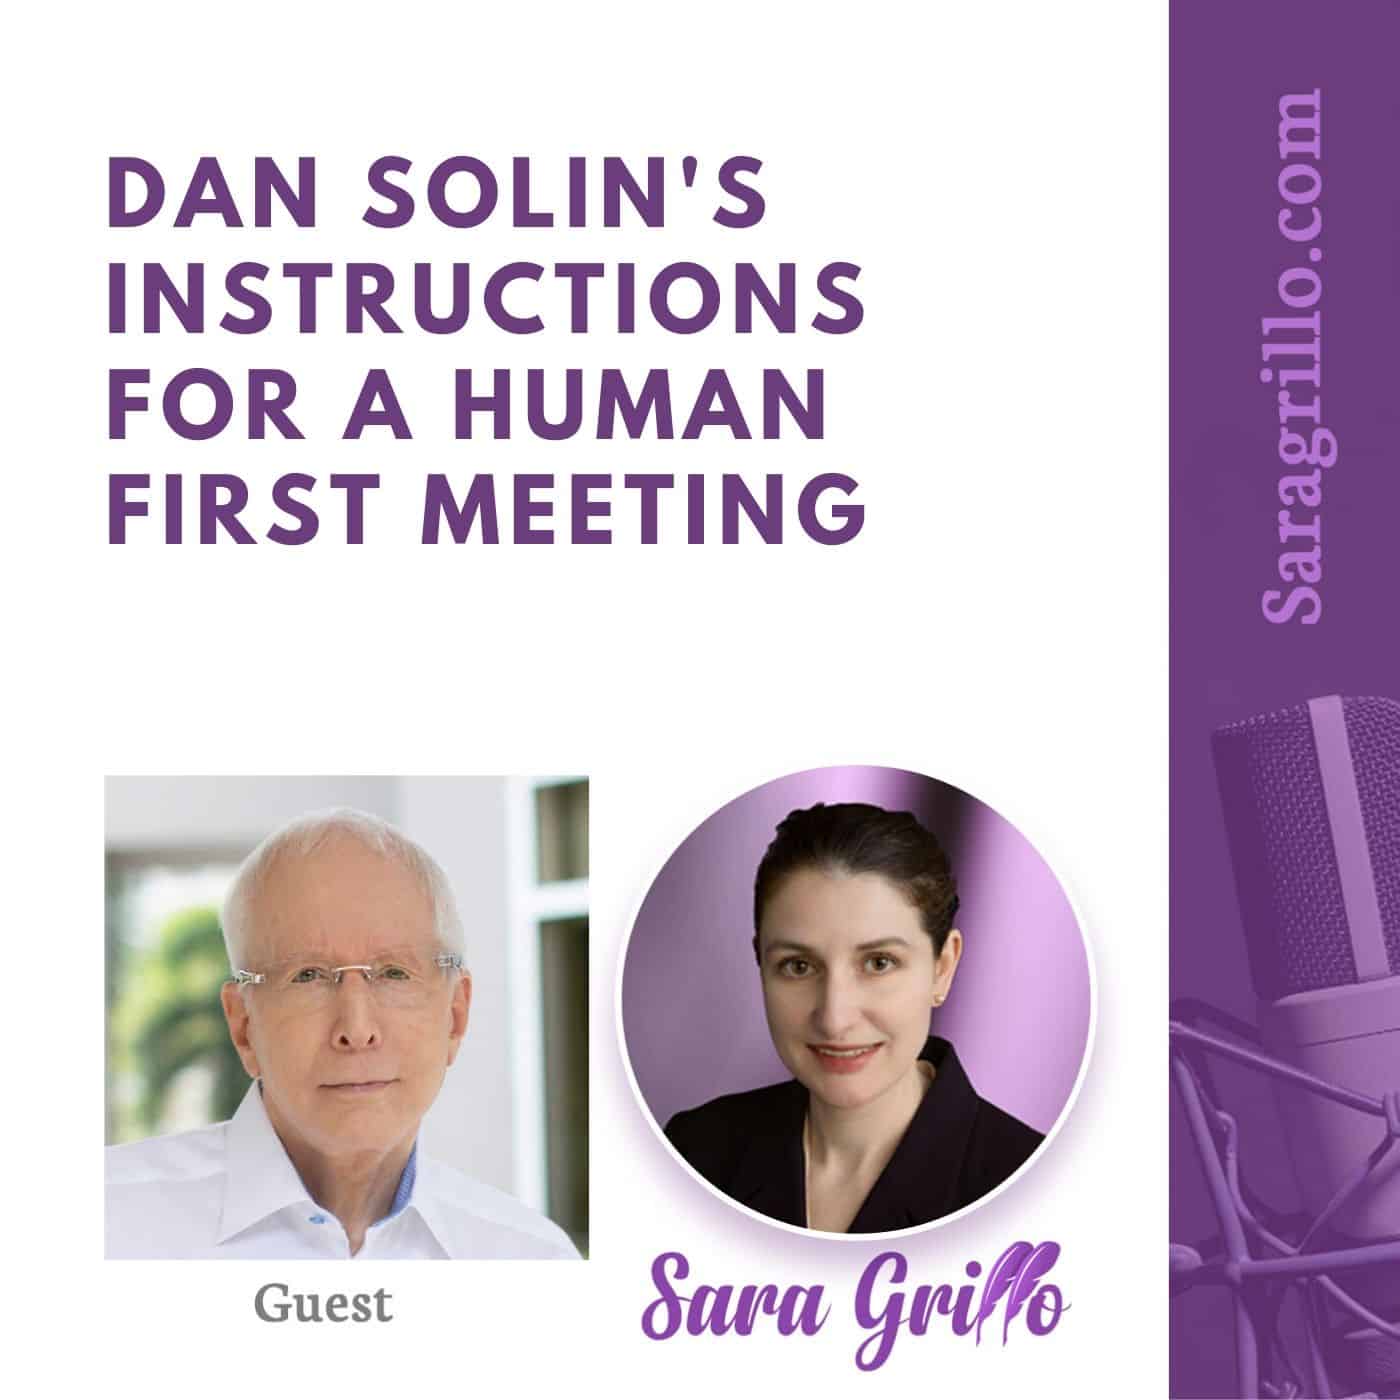 Thrilled to have Dan Solin guide us through what financial advisors should say in the first meeting with a prospect.